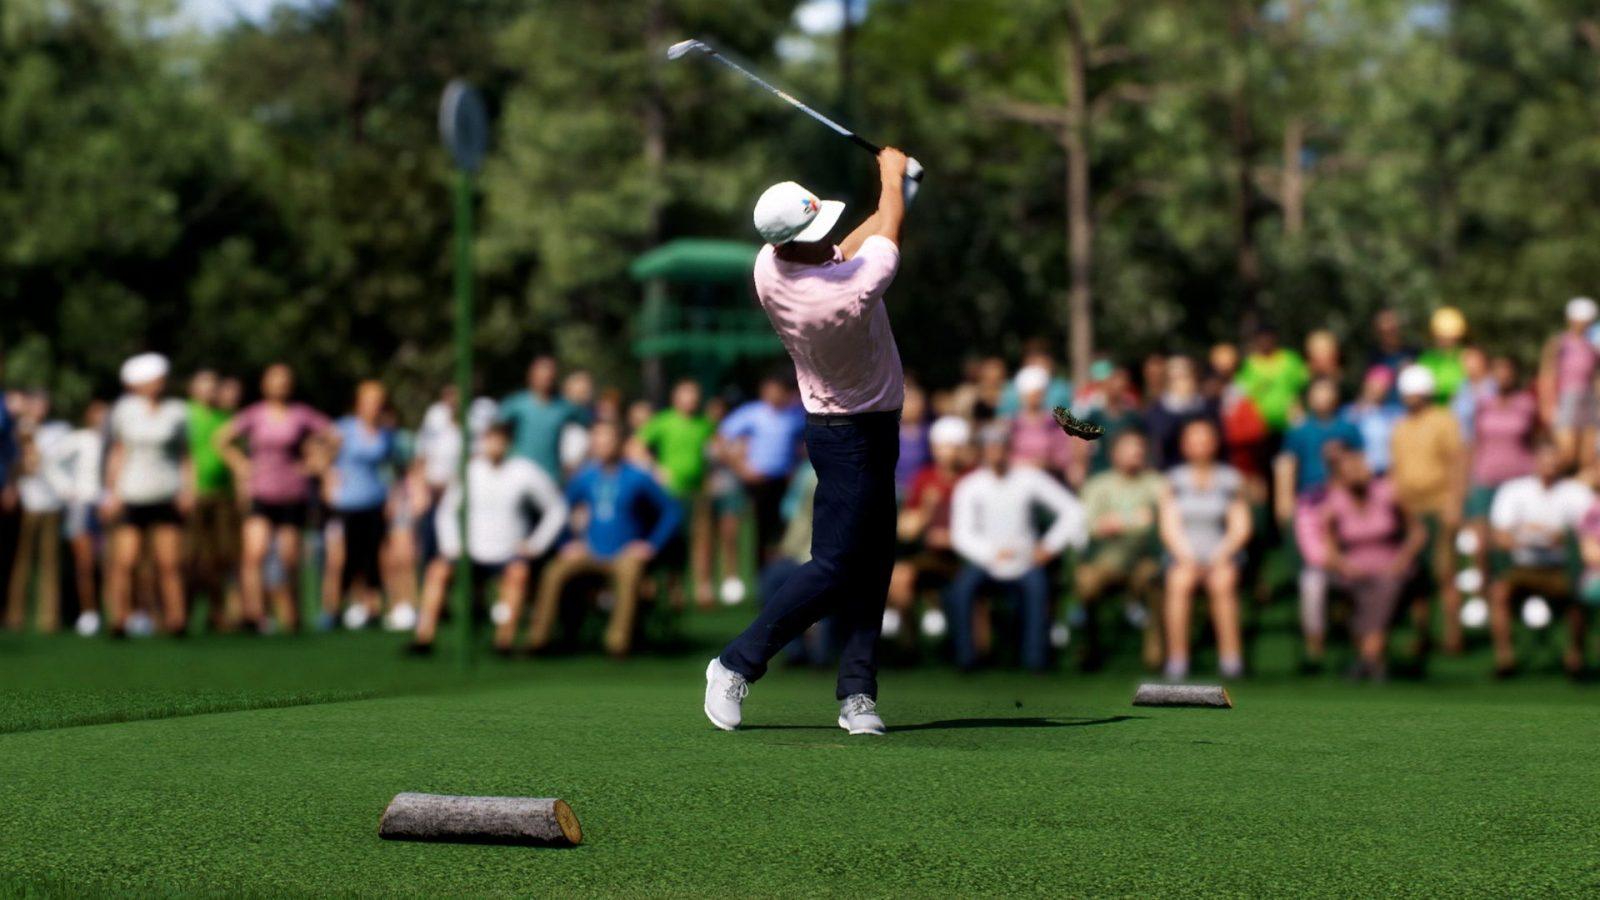 tee shot at augusta national golf course in ea sports pga tour